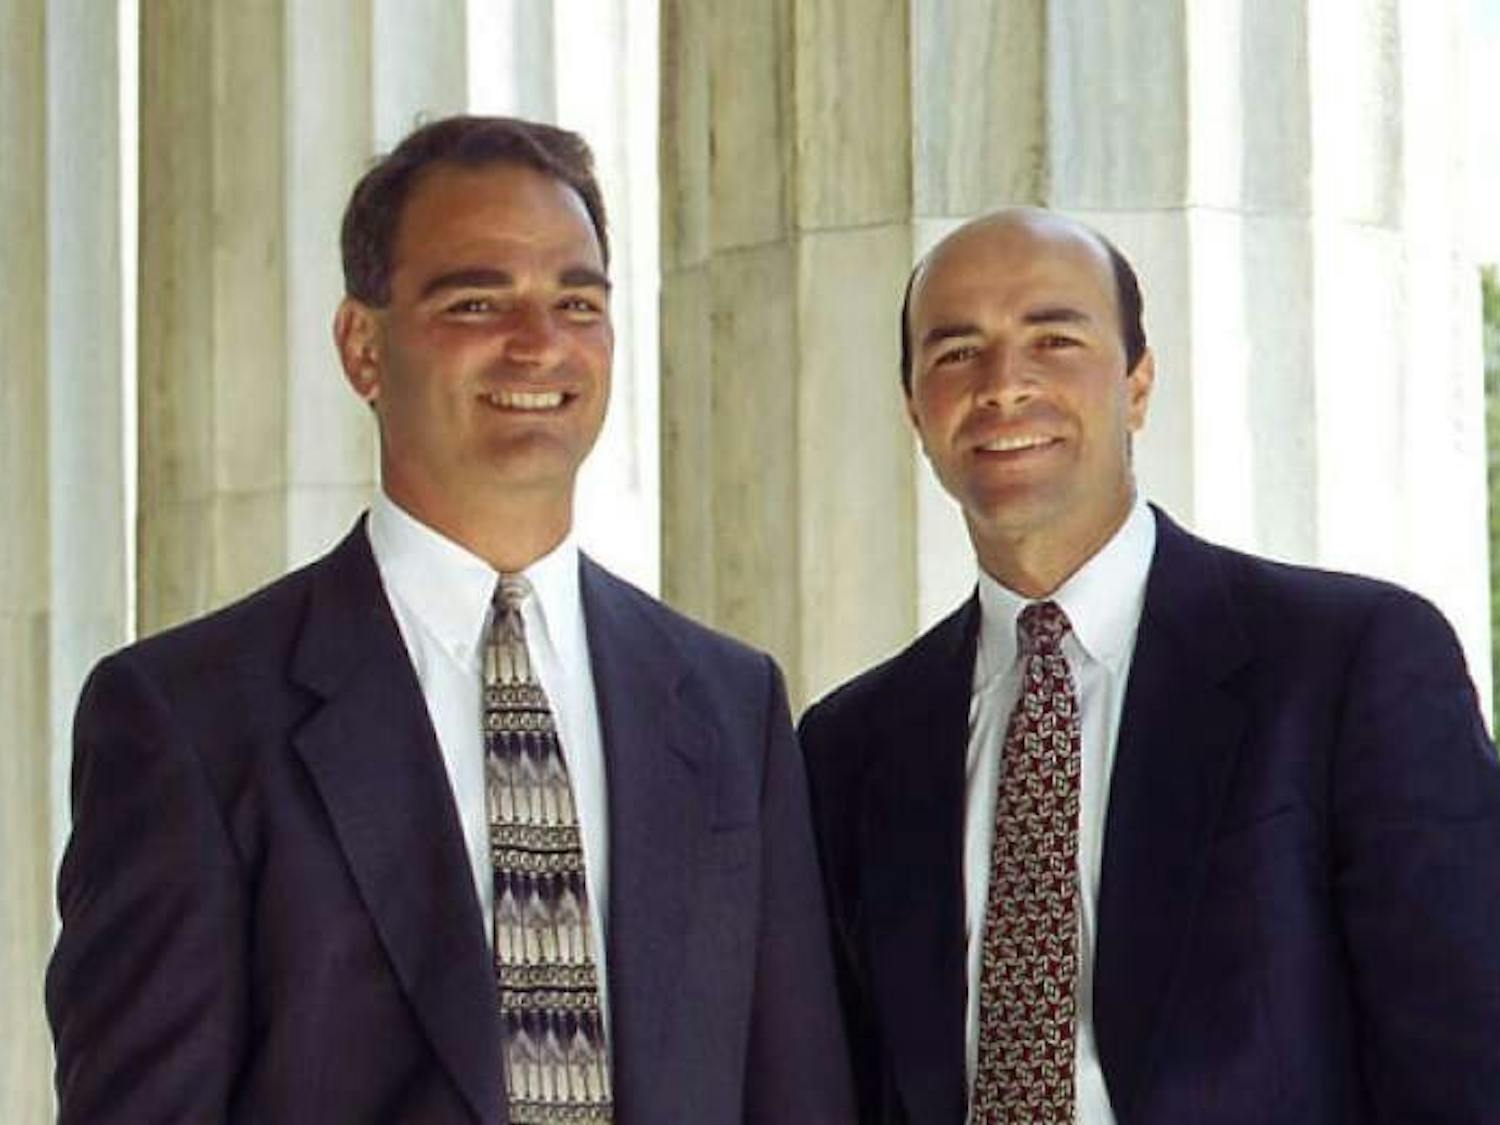 (from left to right) Ross Cellino '82 and Stephen Barnes '83 donated $1 million to the UB School of Law. As a result, UB’s law school renamed 509 O’Brian Hall the “Cellino &amp; Barnes Conference Center.”